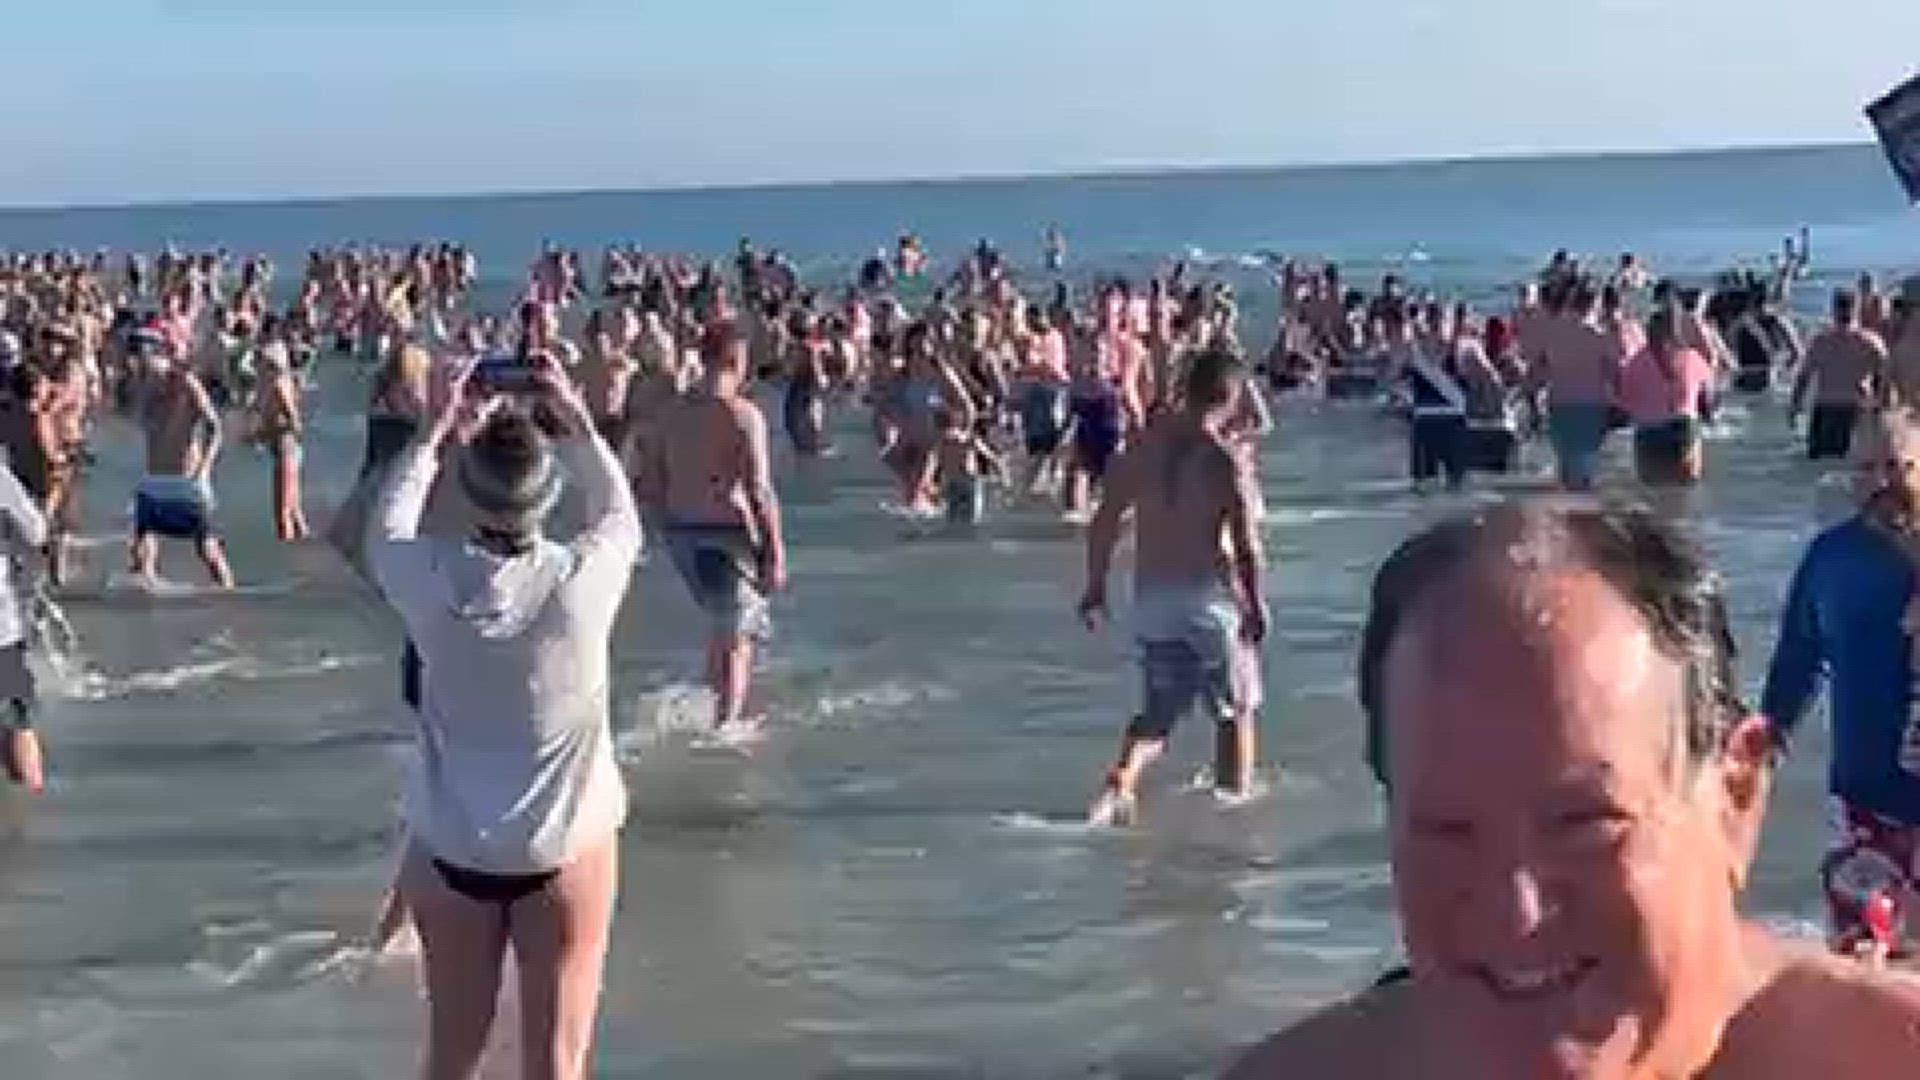 Hundreds of people showed up at Jacksonville Beach on New Year's Day Monday morning for the annual 'polar plunge.'
Credit: Joe Massa